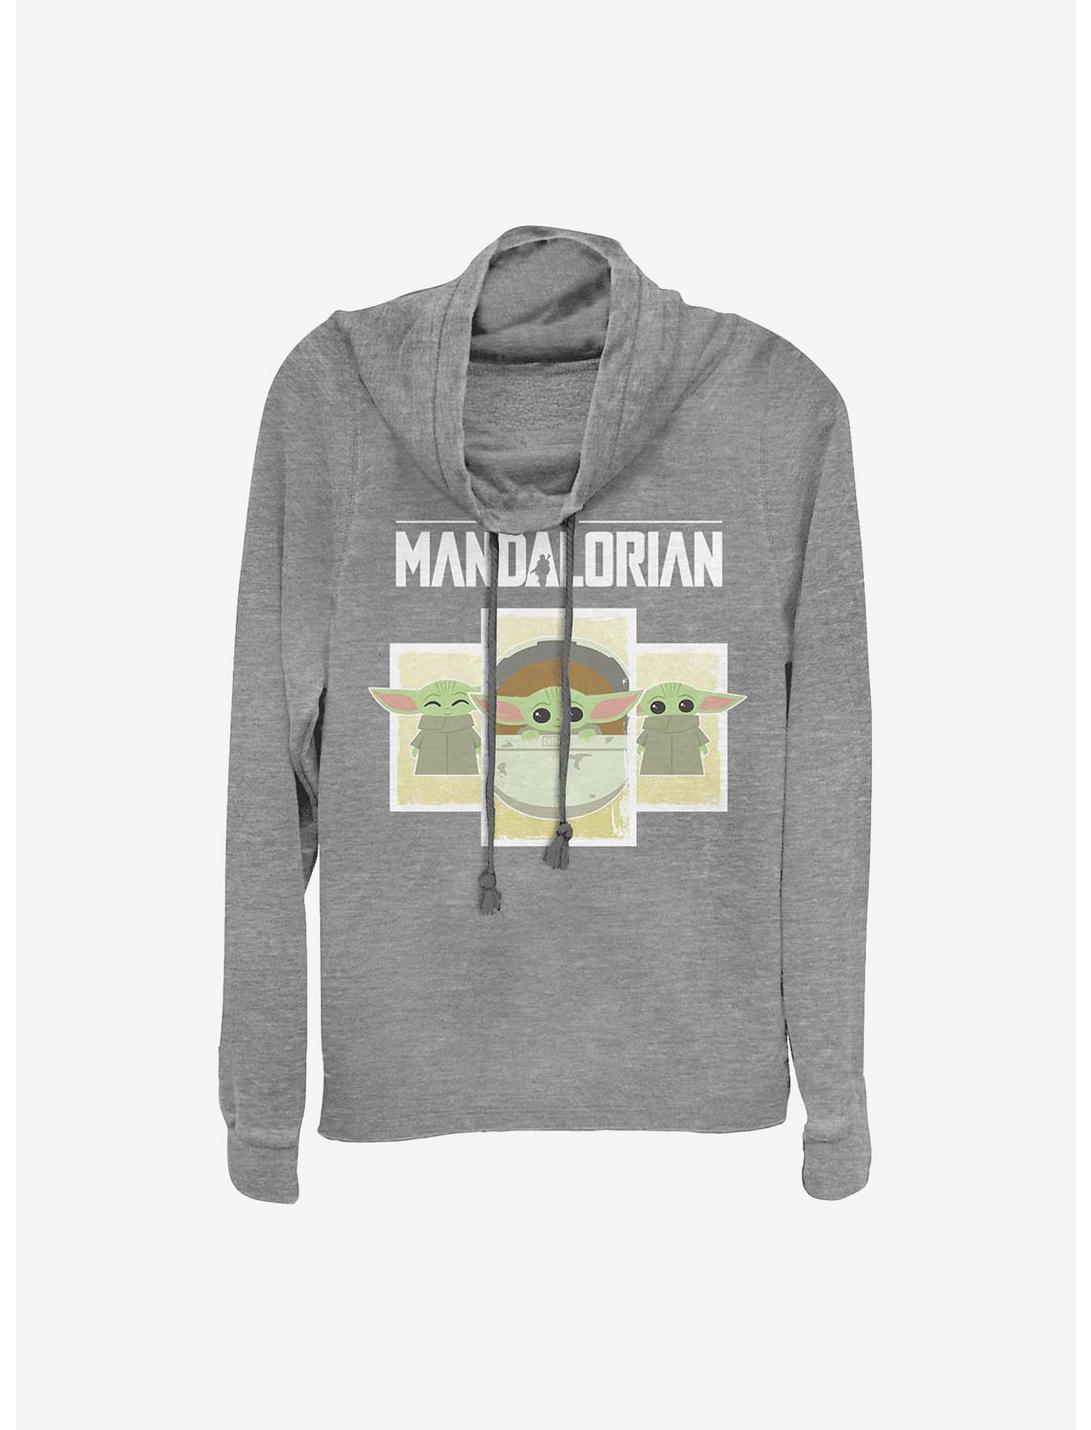 Star Wars The Mandalorian The Child Boxes Cowlneck Long-Sleeve Girls Top, GRAY HTR, hi-res